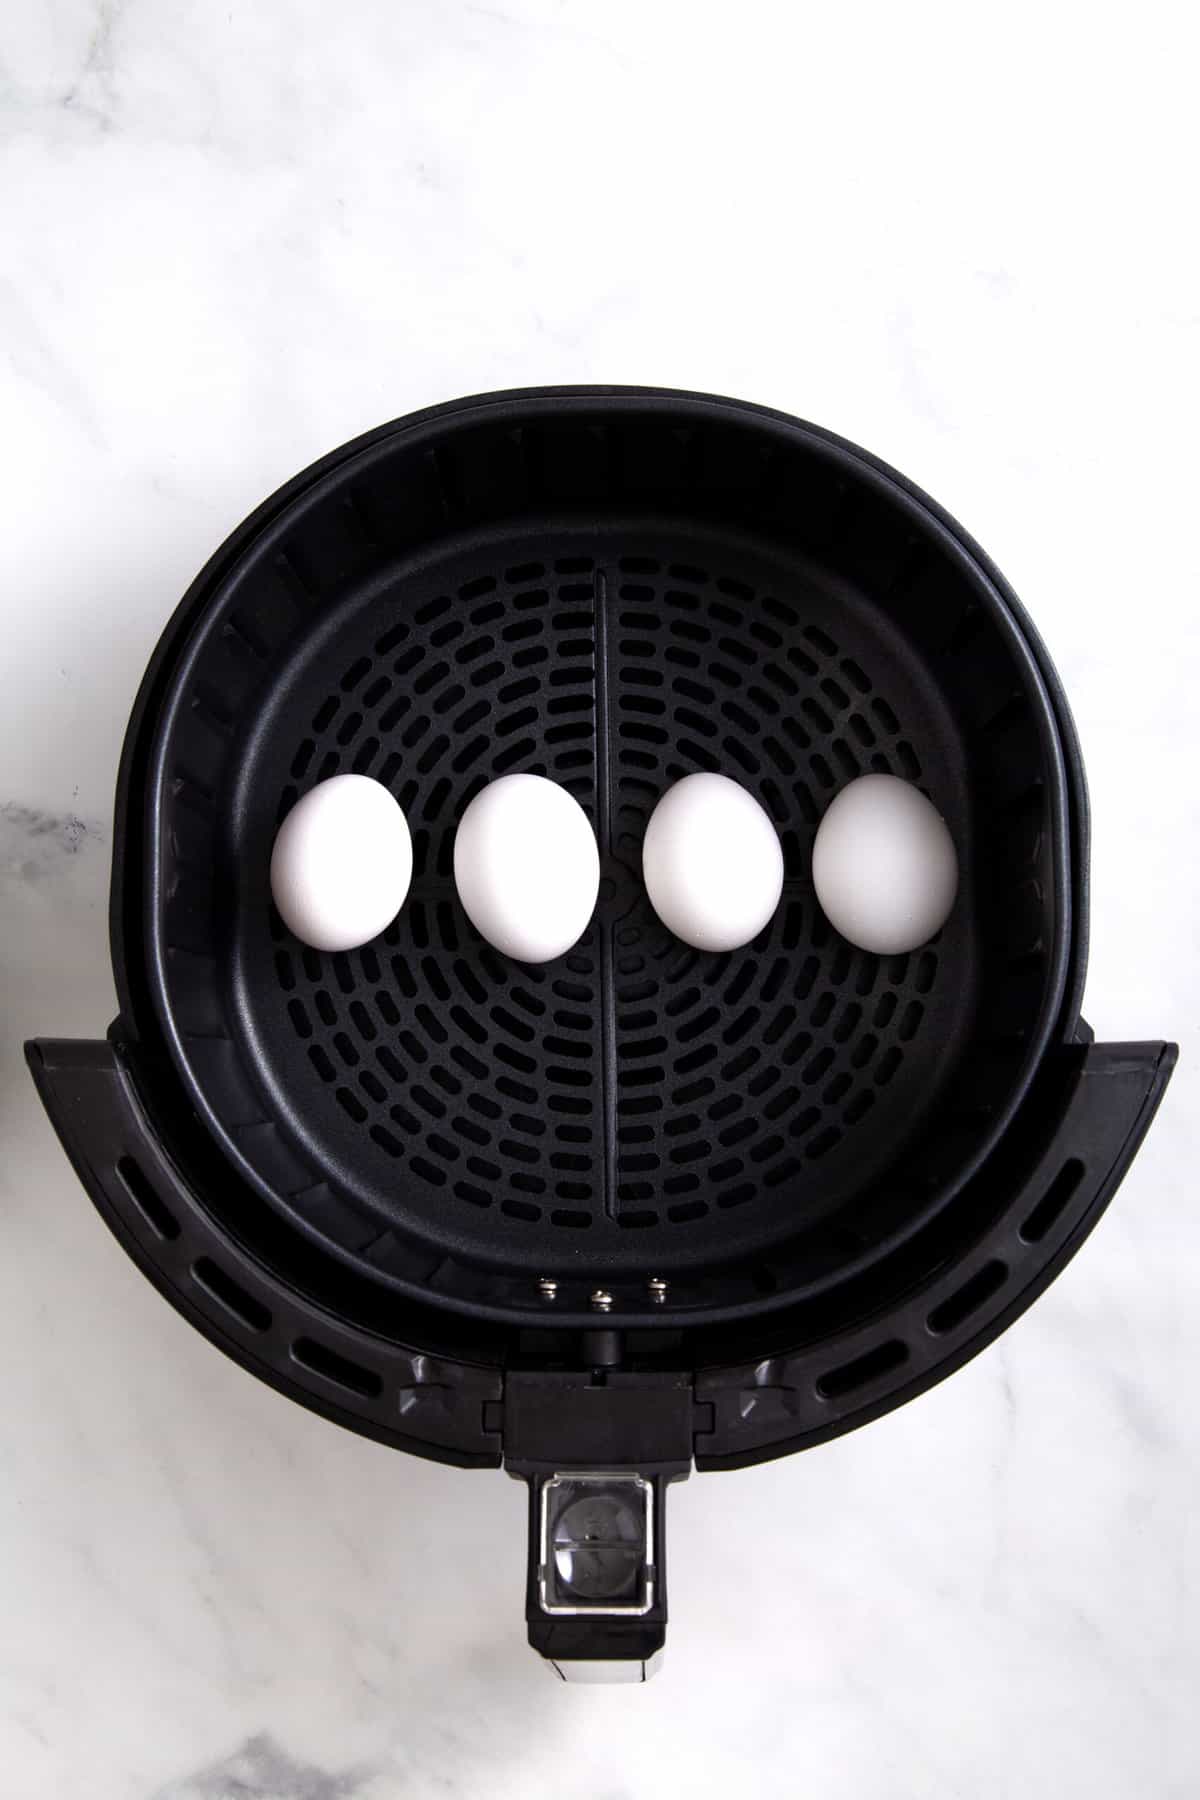 step 1 to make hard boiled or soft boiled eggs in an air fryer